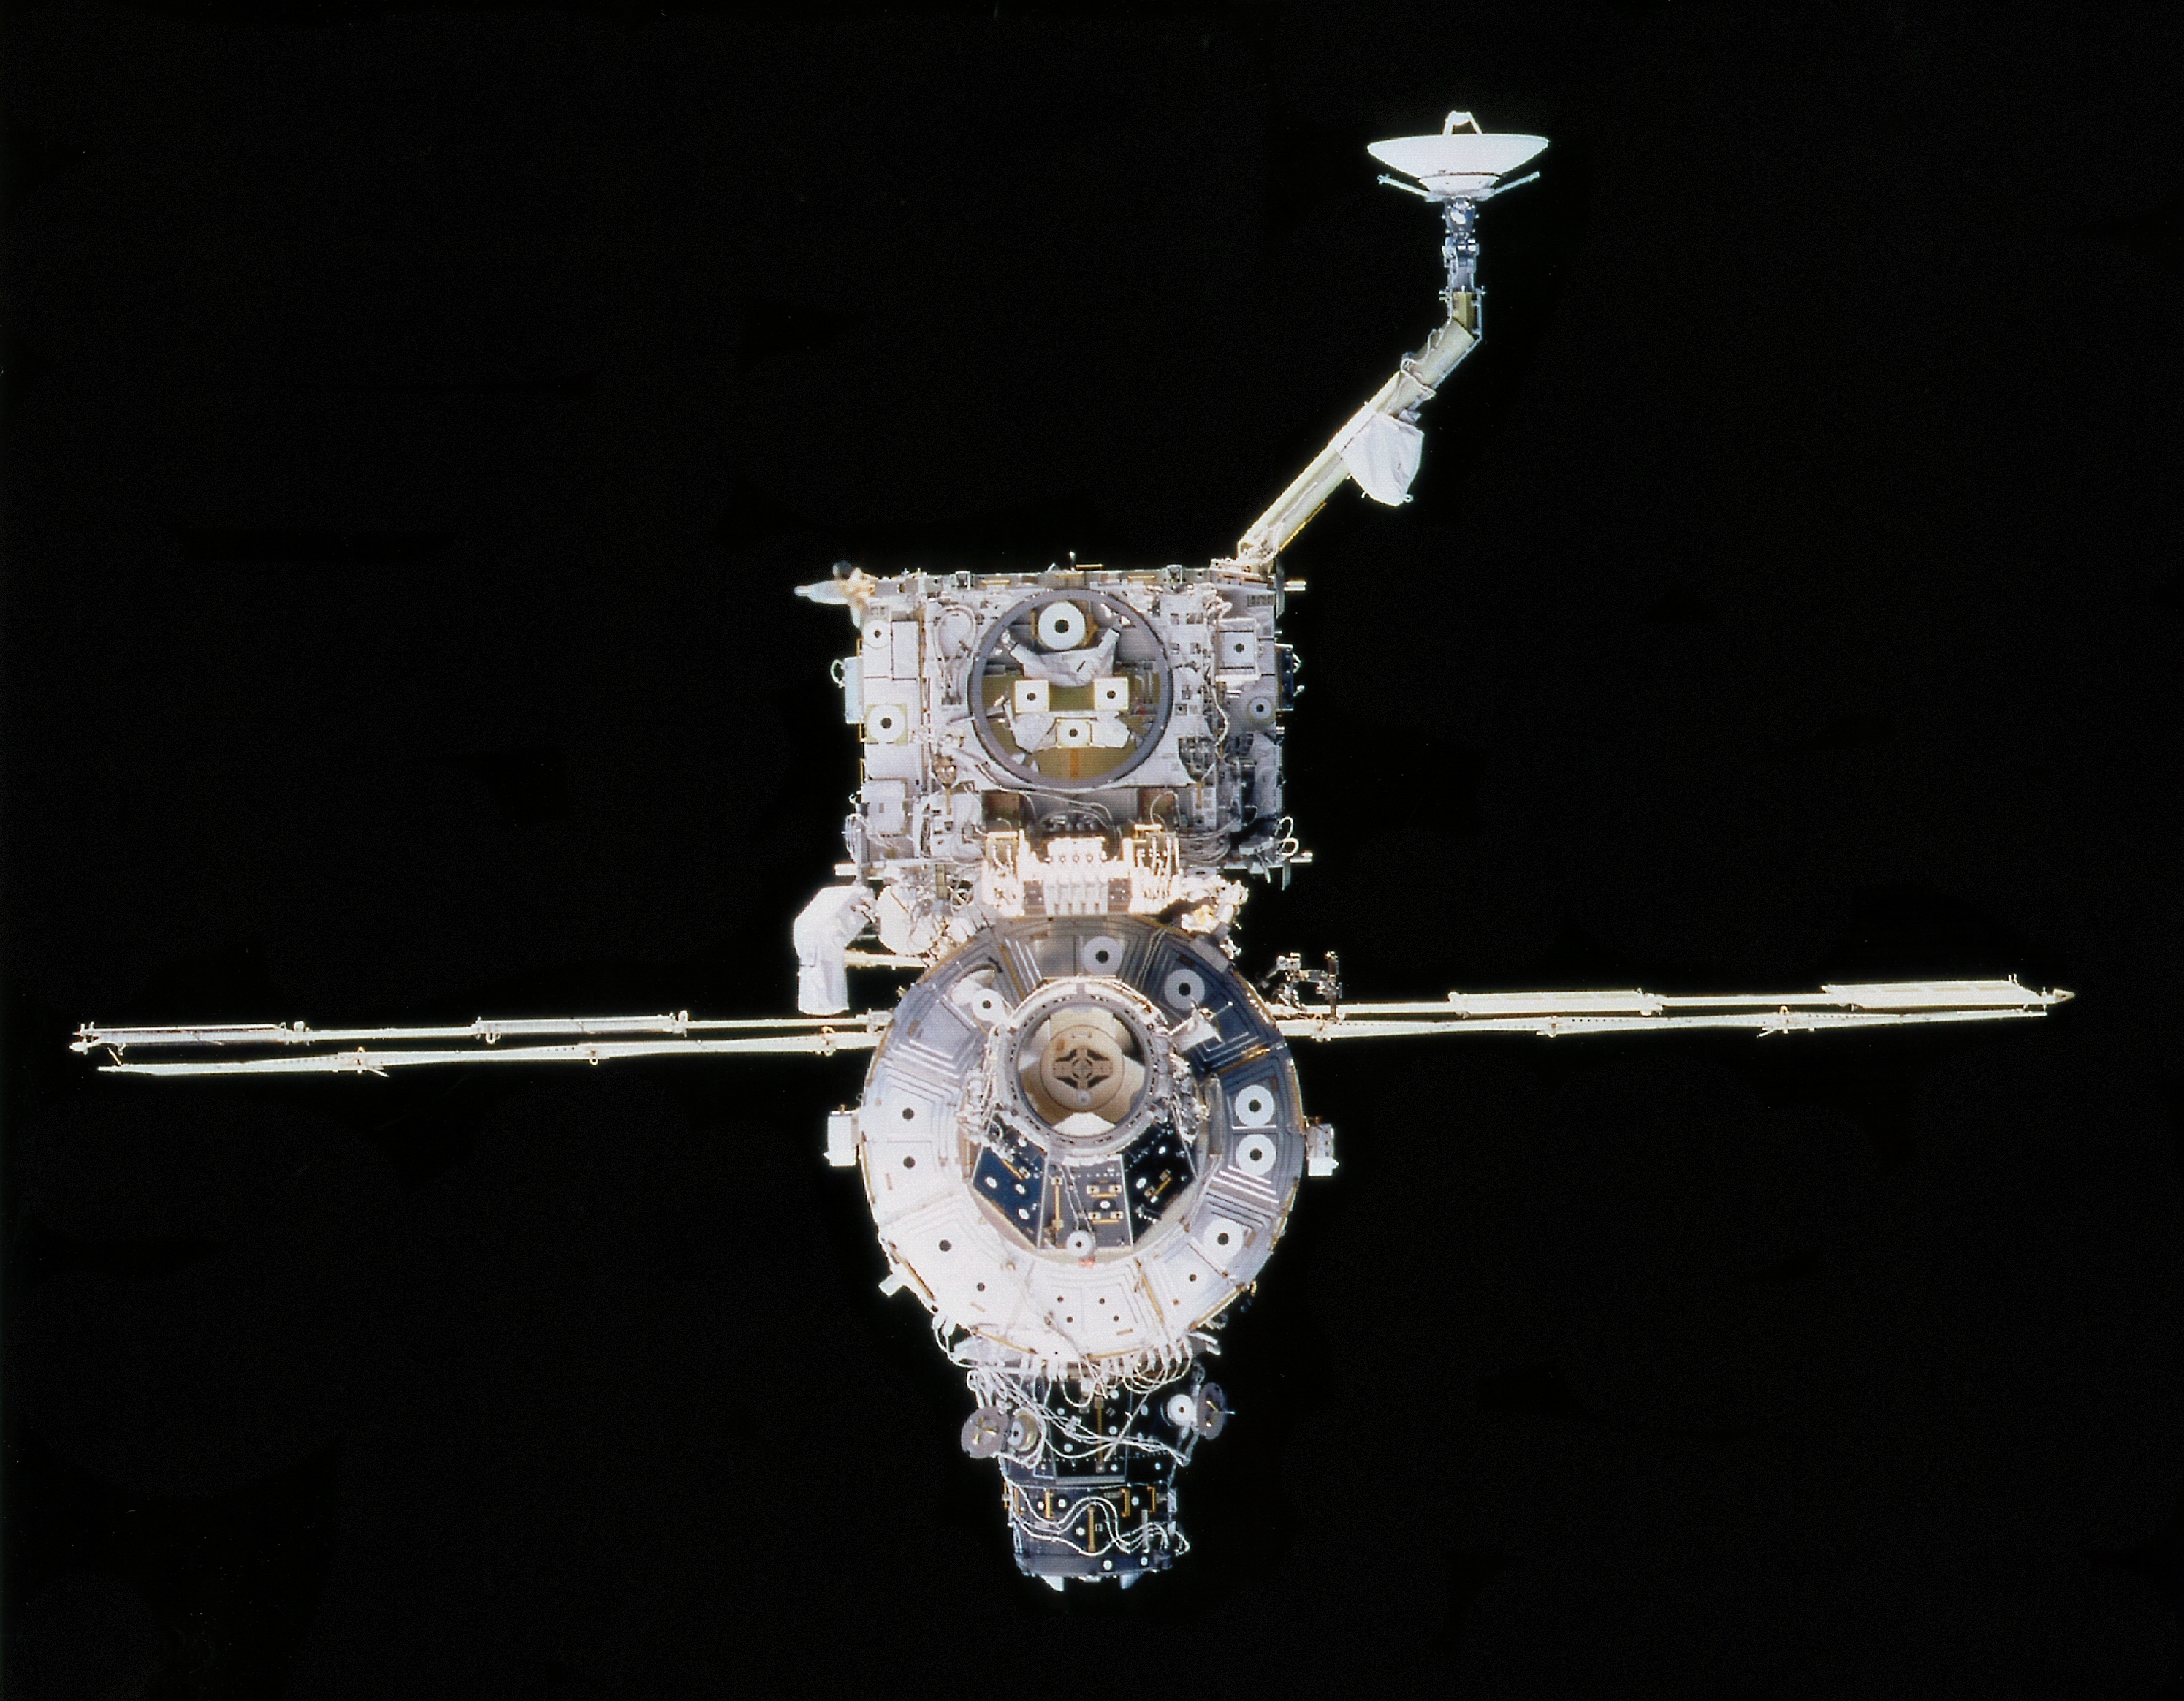 ISS Unity and Z1 truss structure from STS-92